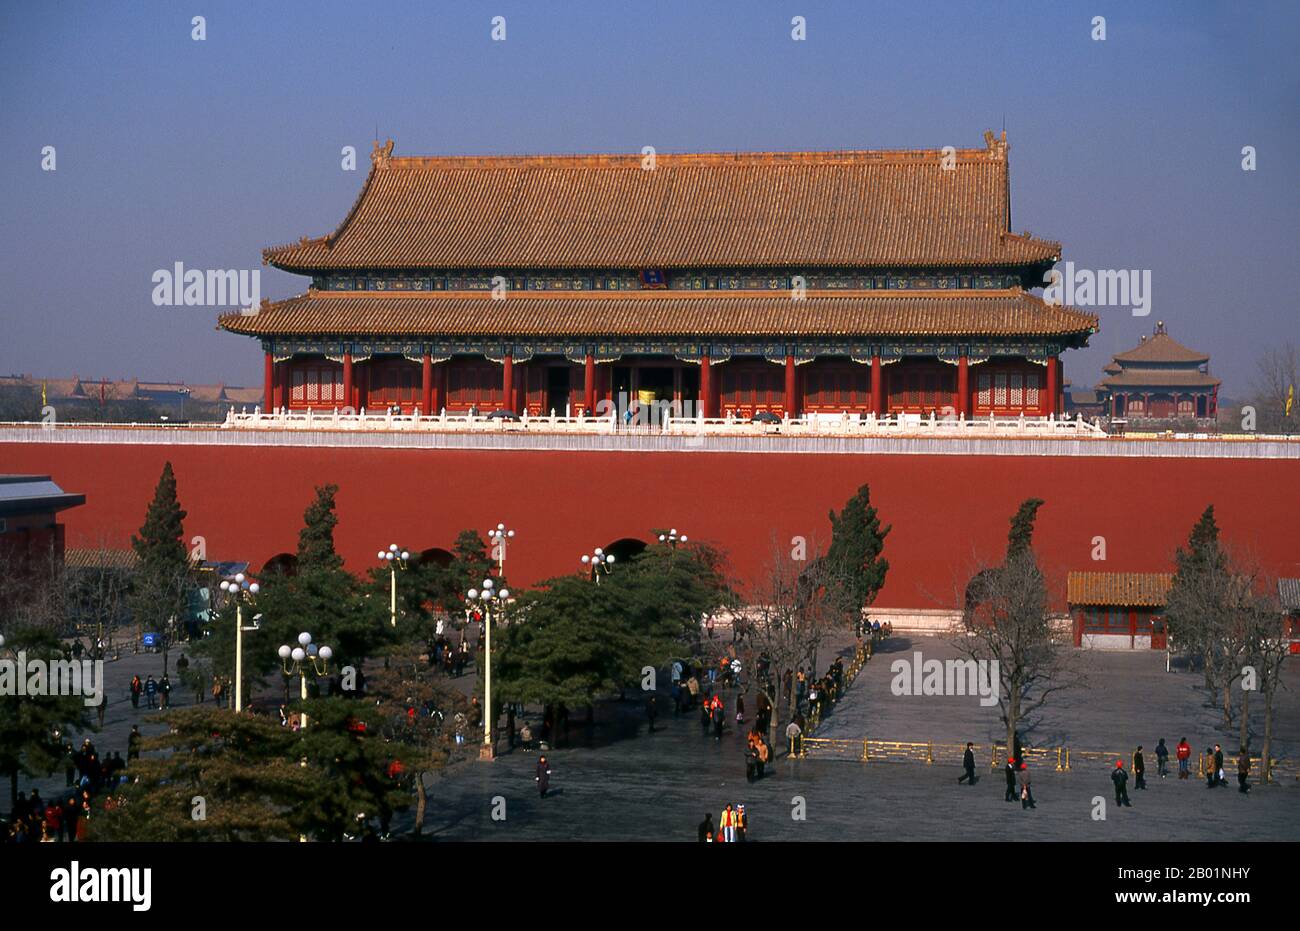 The Duanmen (Upright Gate) sits between Tiananmen (Gate of Heavenly Peace) and Wumen (Meridian Gate), the main entrance to the Forbidden City. The gate was built in 1420 during the Ming Dynasty (1368 - 1644).  The Forbidden City, built between 1406 and 1420, served for 500 years (until the end of the imperial era in 1911) as the seat of all power in China, the throne of the Son of Heaven and the private residence of all the Ming and Qing dynasty emperors. The complex consists of 980 buildings with 8,707 bays of rooms and covers 720,000 m2 (7,800,000 sq ft). Stock Photo